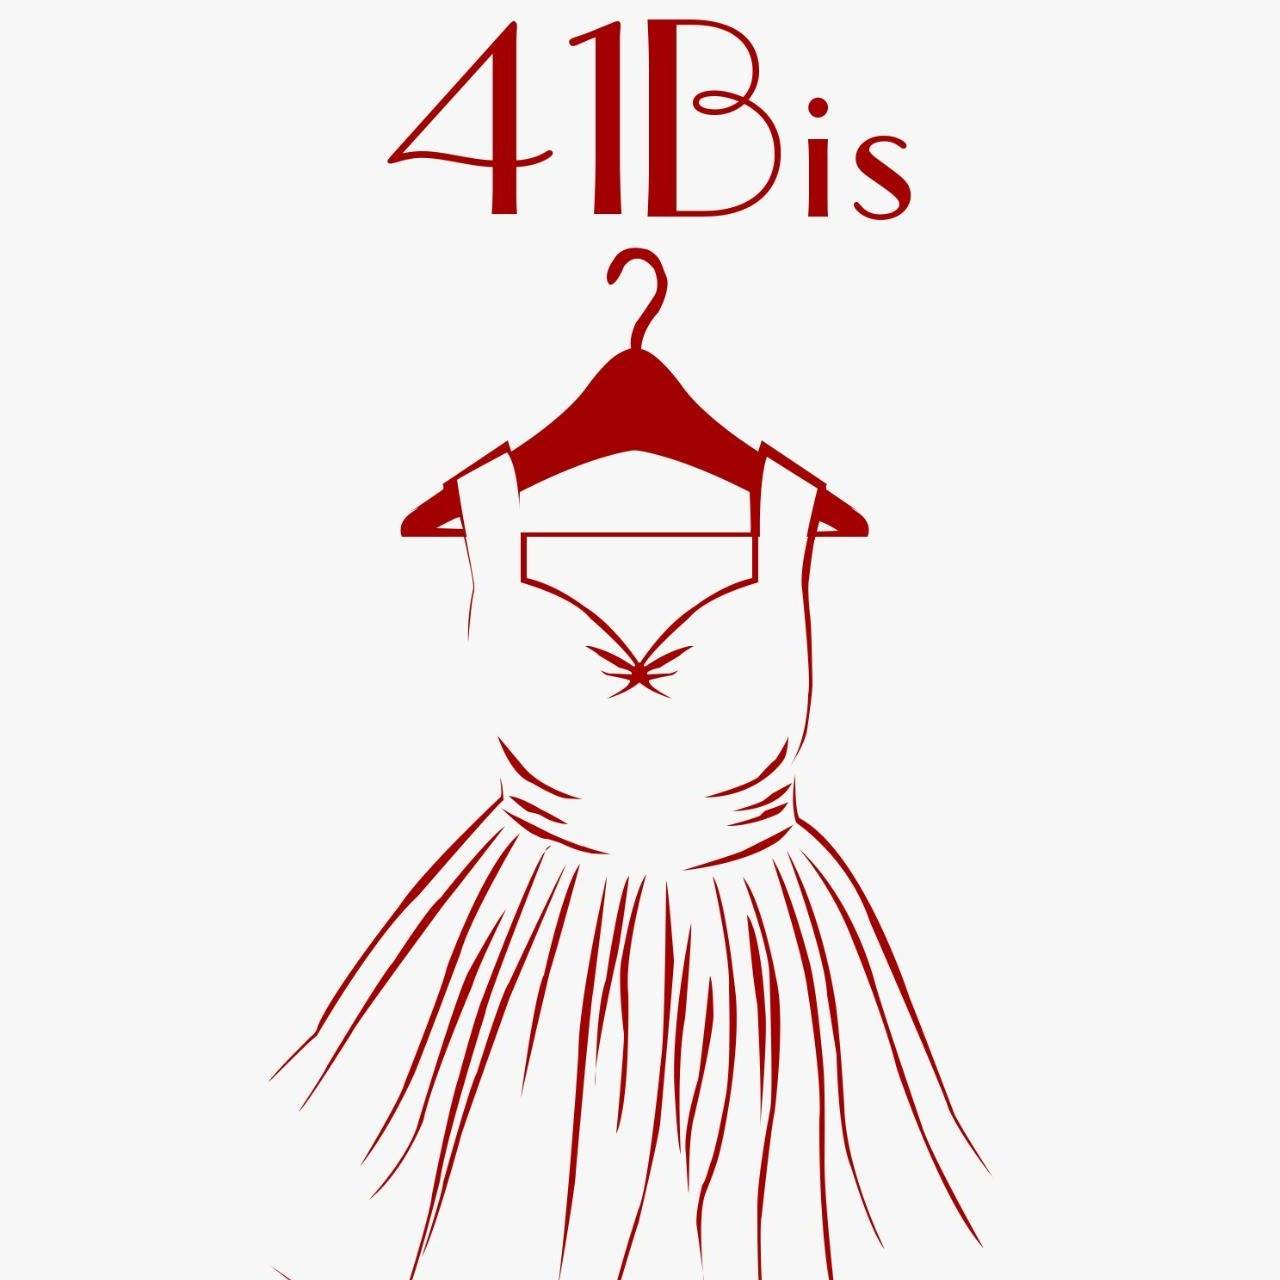 41Bis - Click and collect Angers